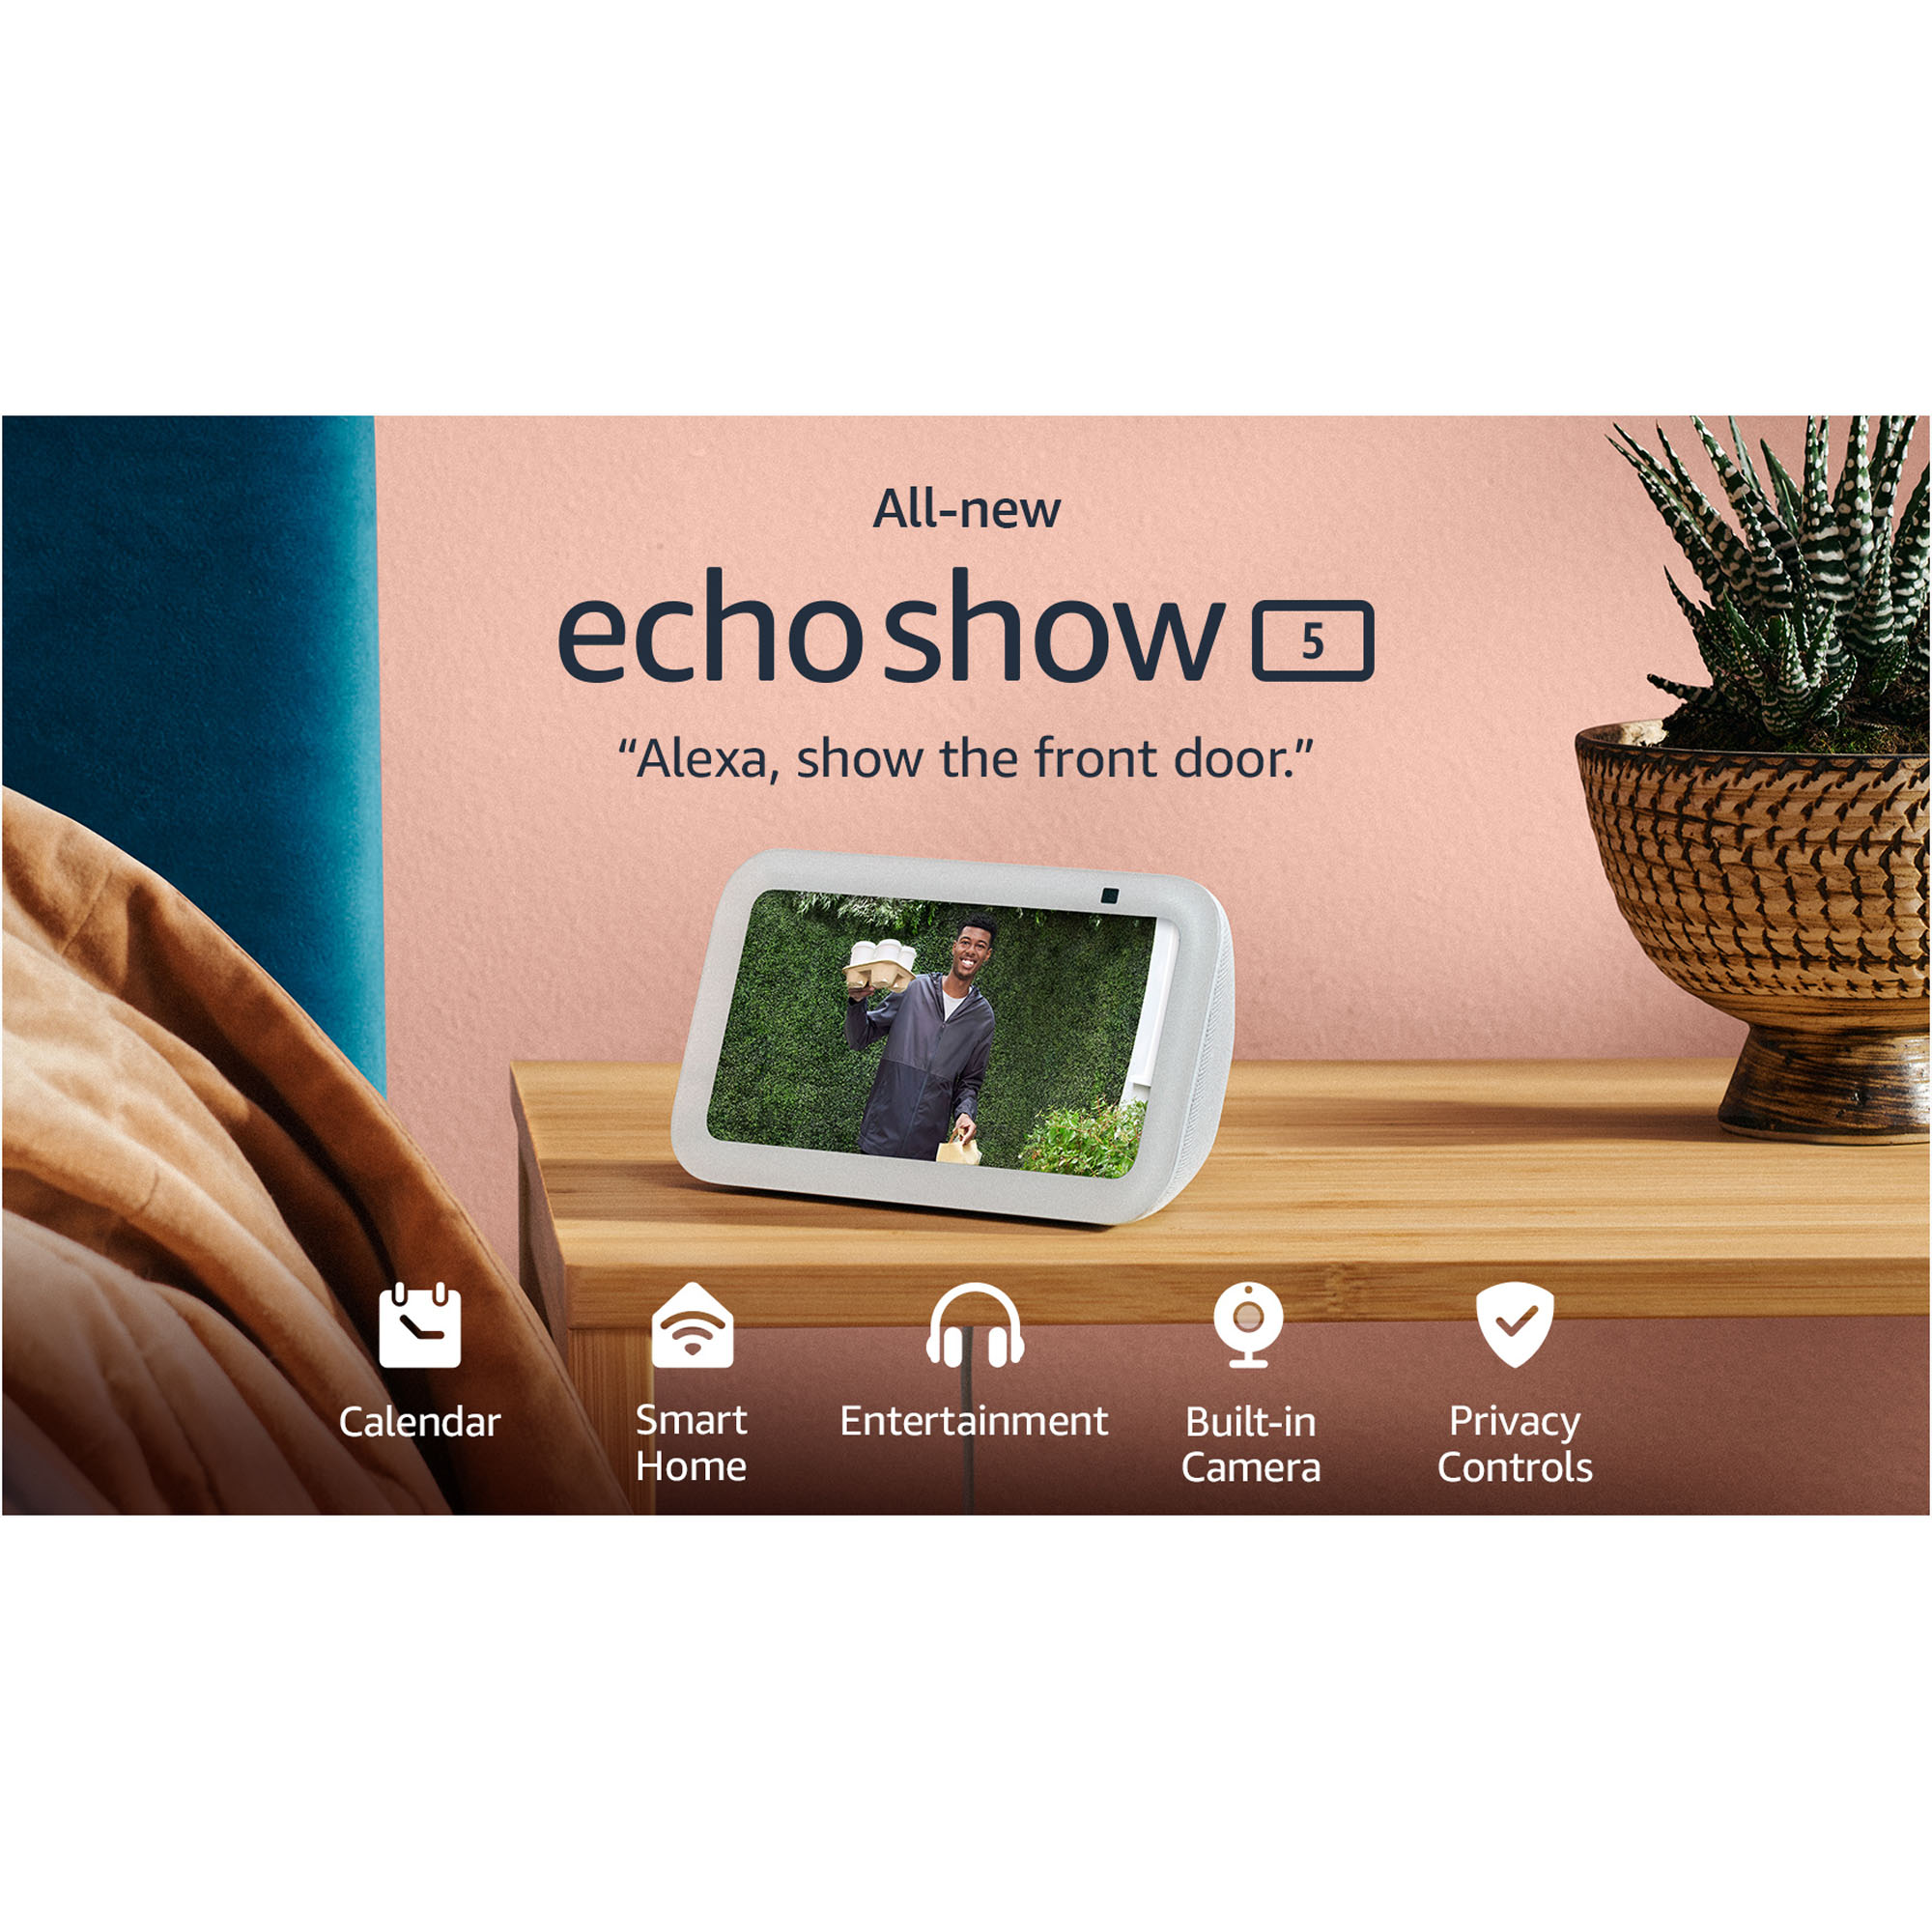 Echo Show 5 3rd Gen debuts with improved sound